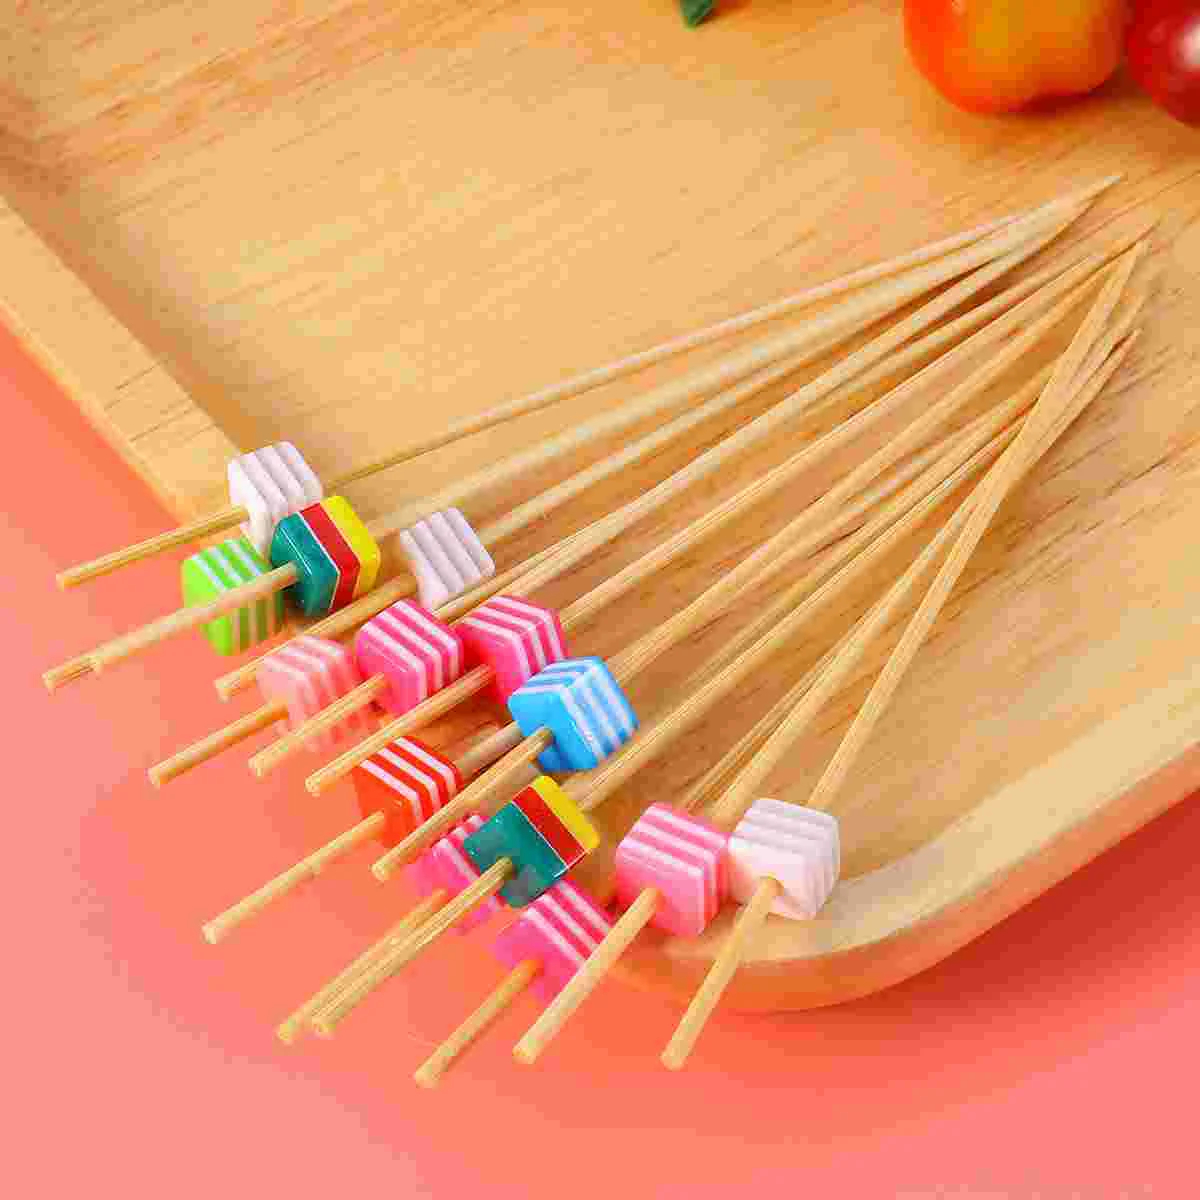 

Picks Cocktail Fruit Toothpicks Skewers Appetizer Sticks Appetizers Bamboo Party Wooden Sandwiches Decorative Stick Desserts